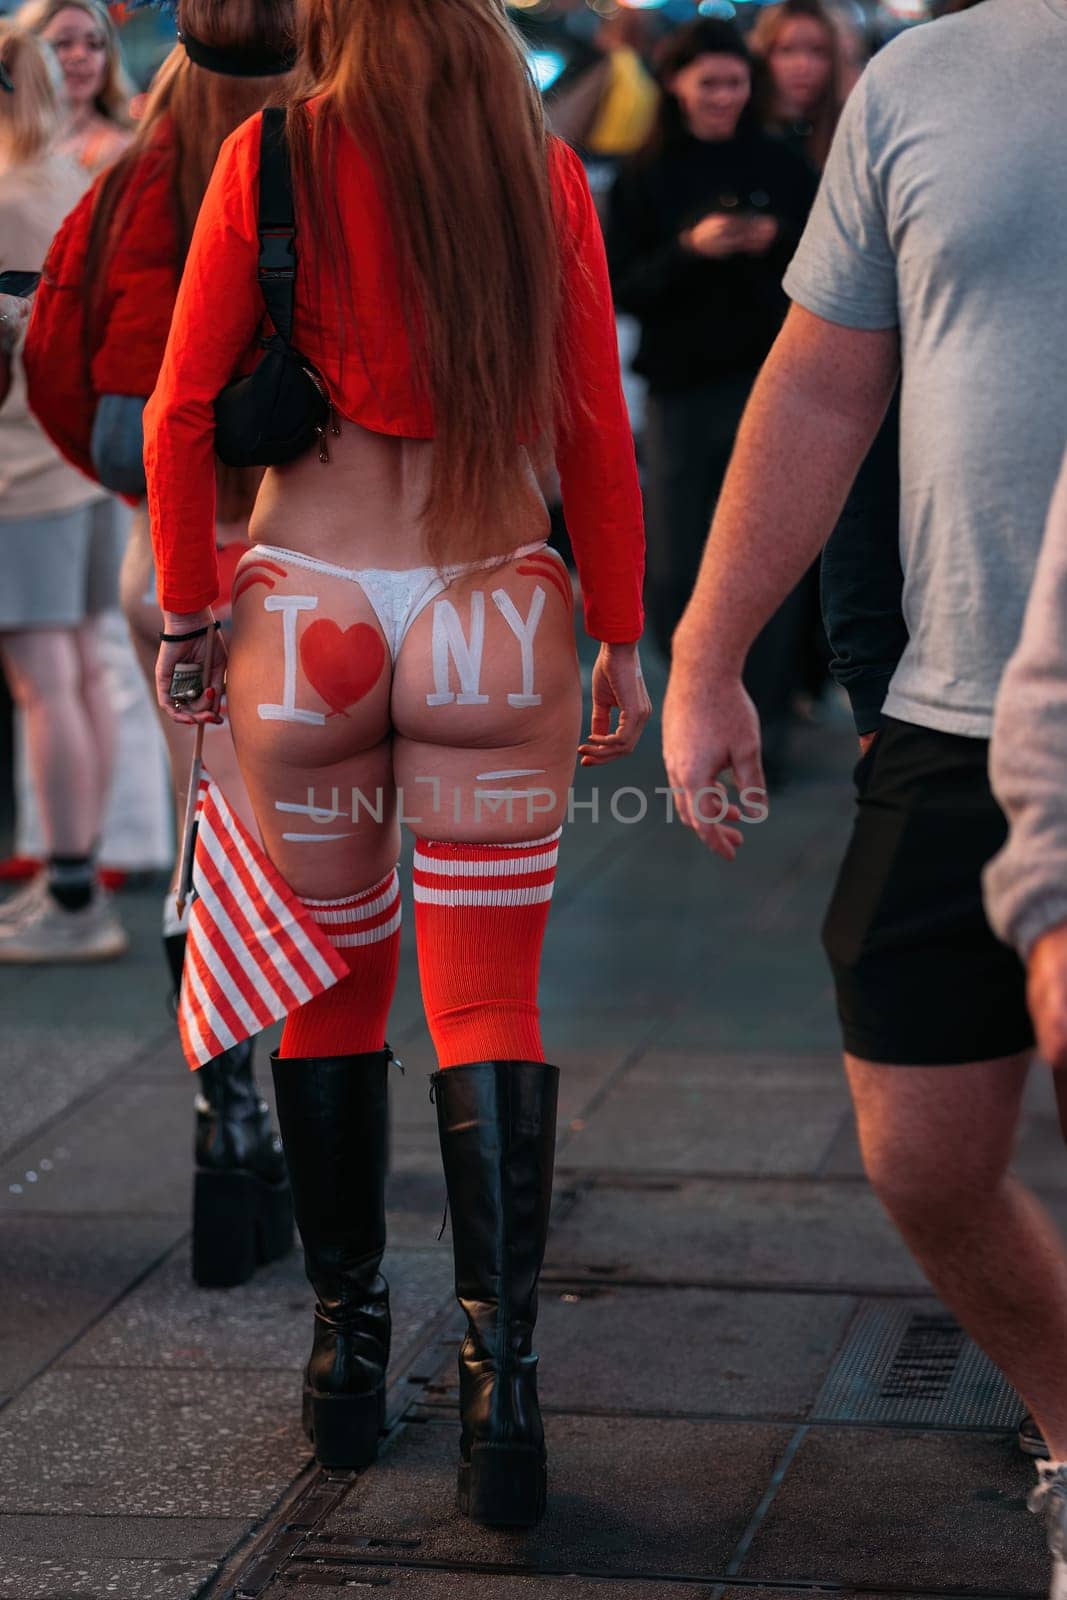 Creative I Love NY Body Paint on Street Performer in Times Square by apavlin